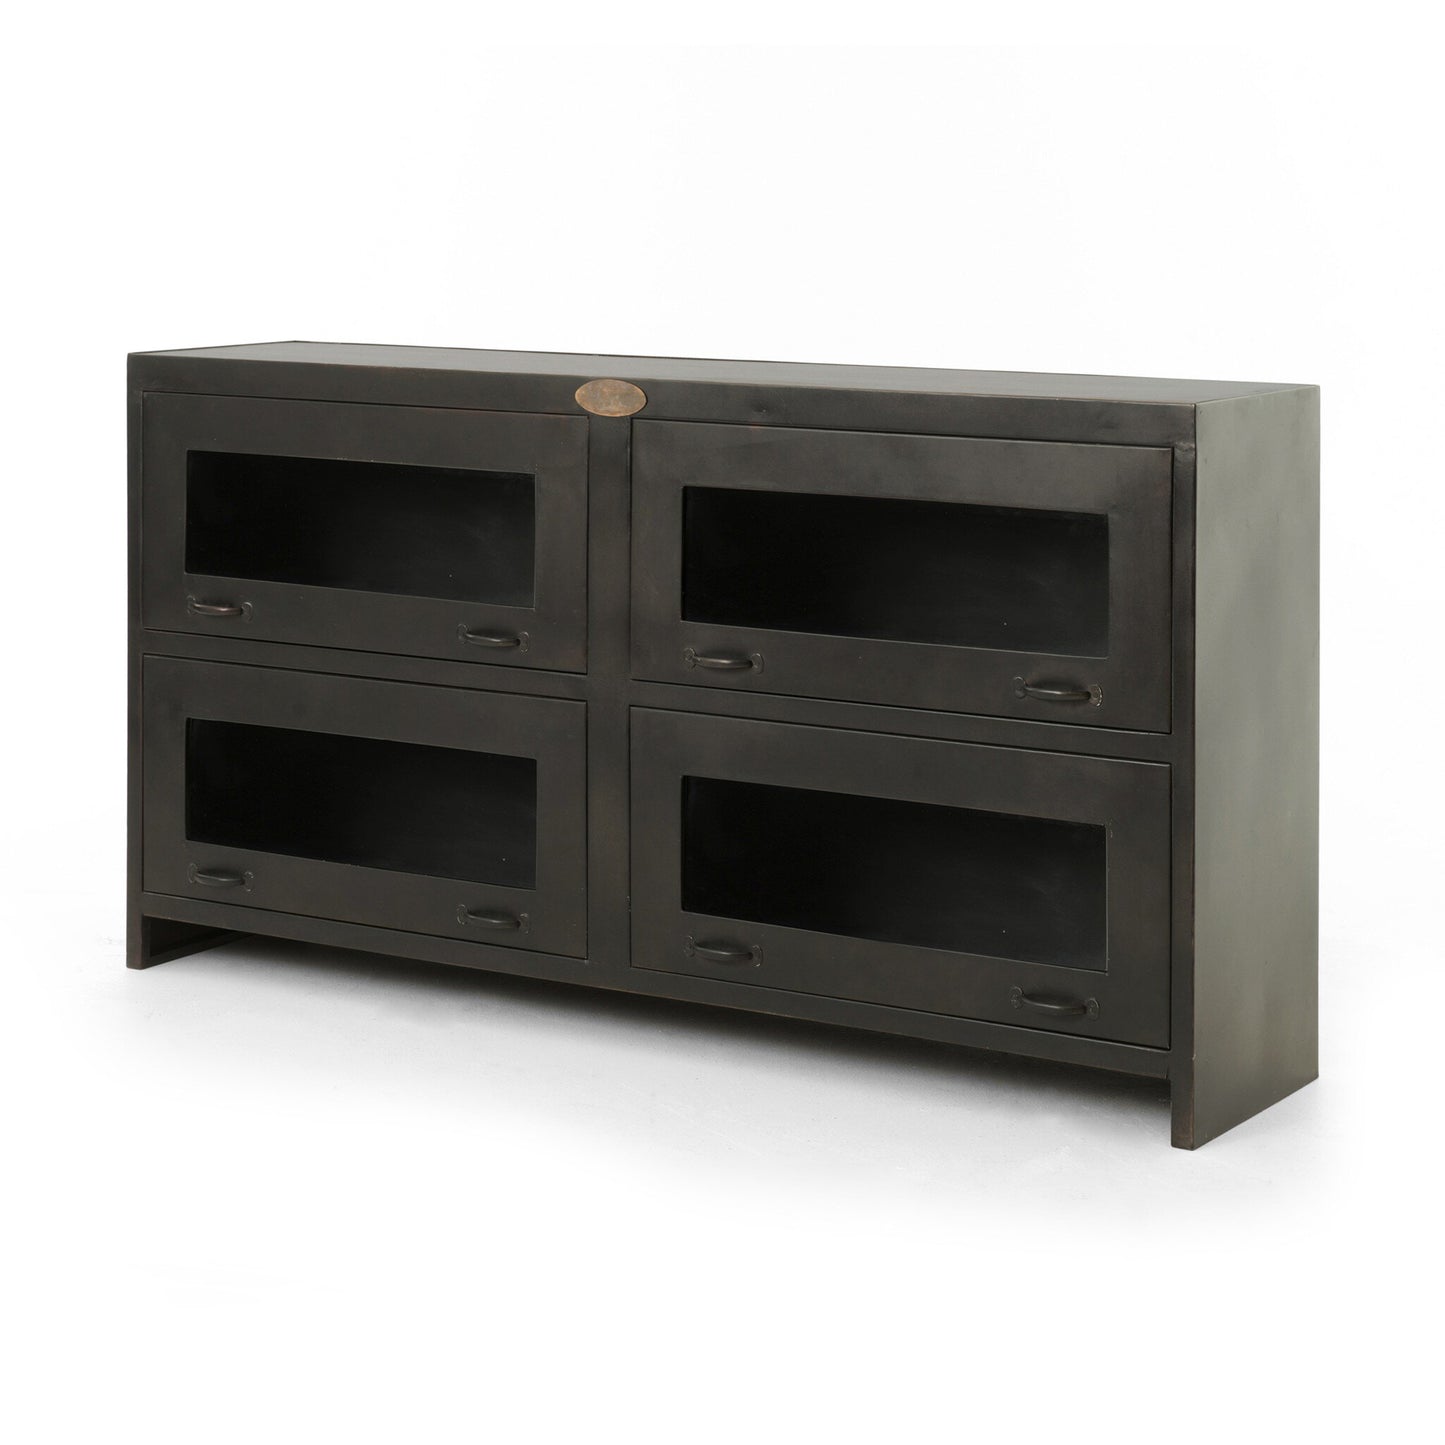 King Media Console